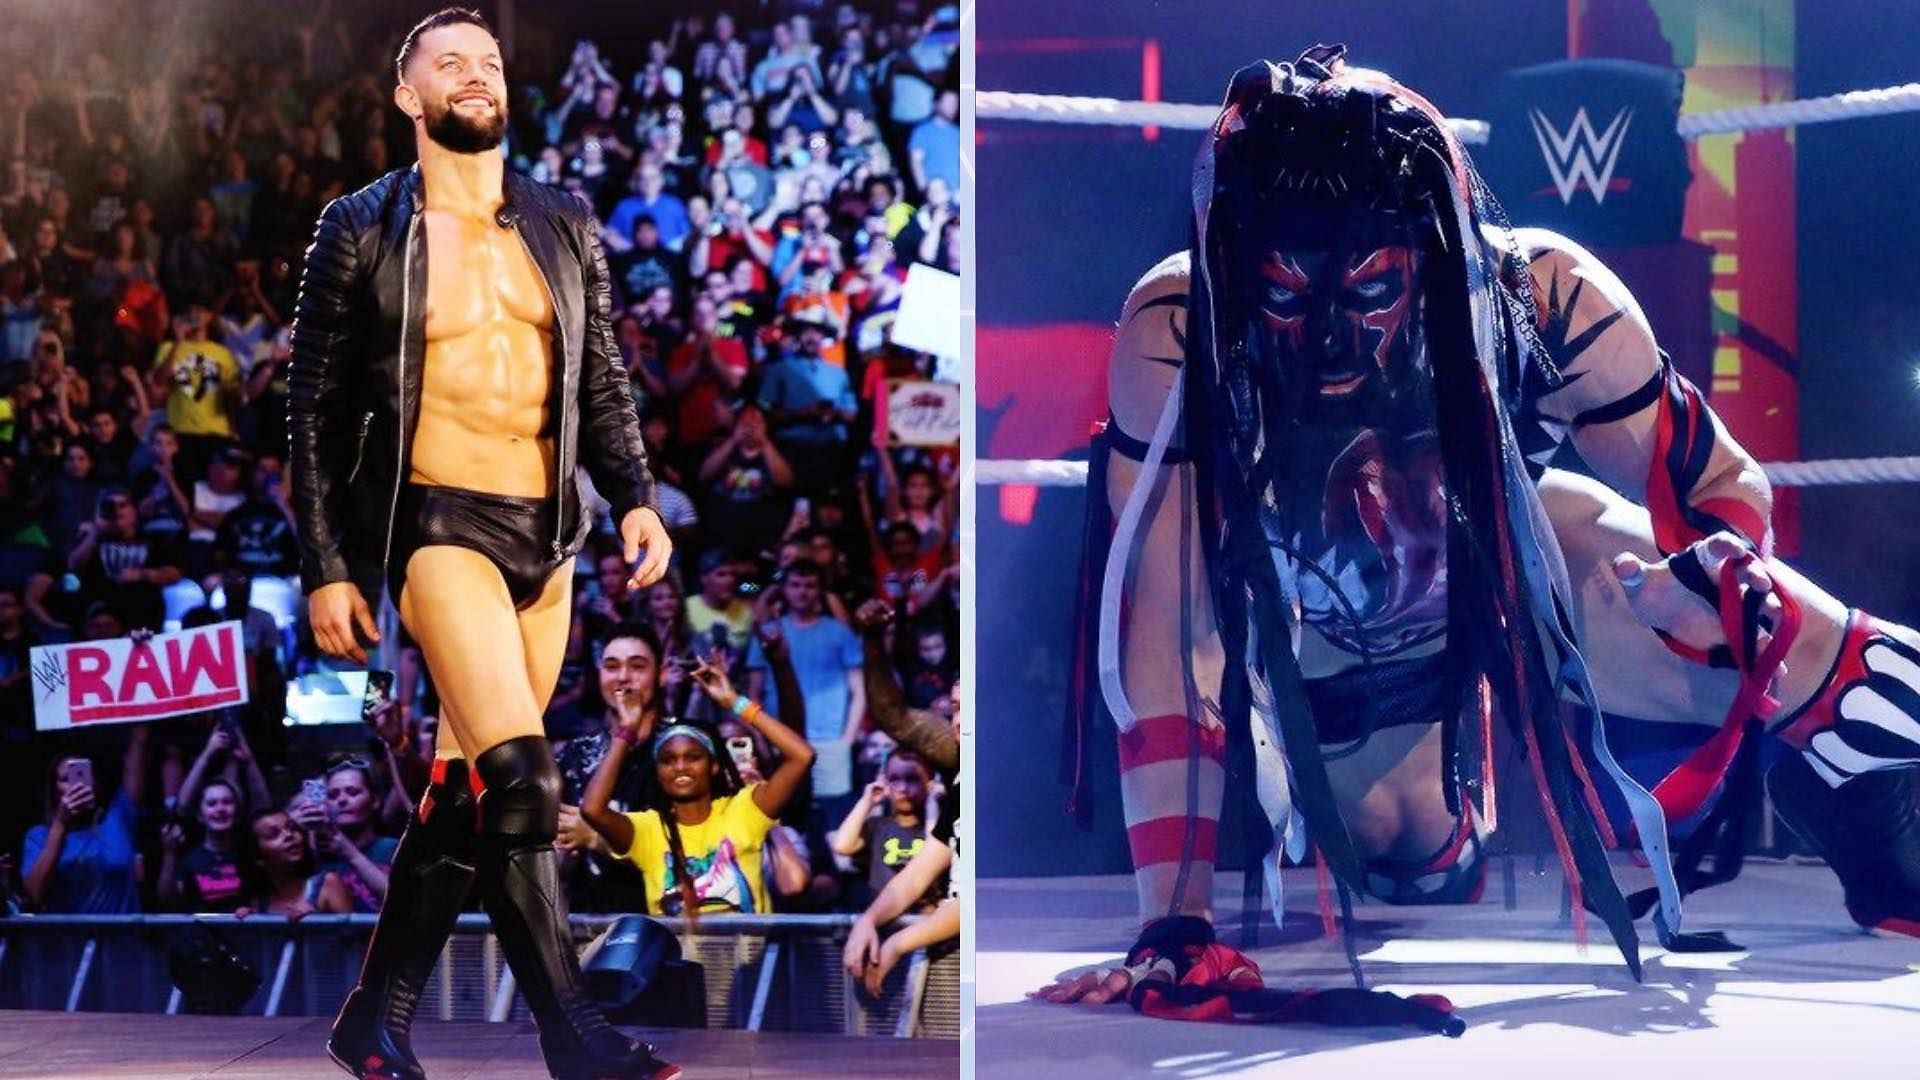 Finn Balor is currently a part of The Judgment Day